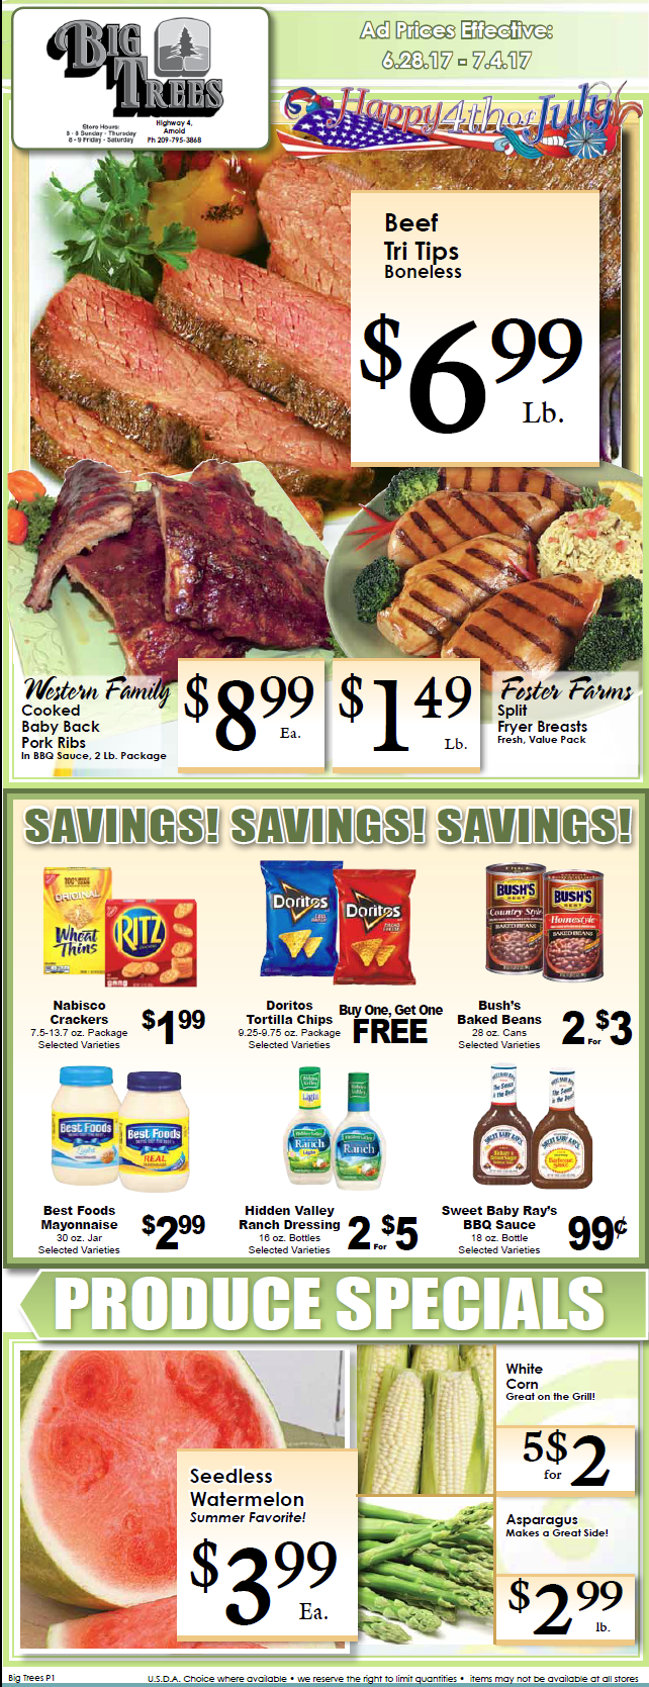 Big Trees Market Weekly Ad & Specials Through July 4th